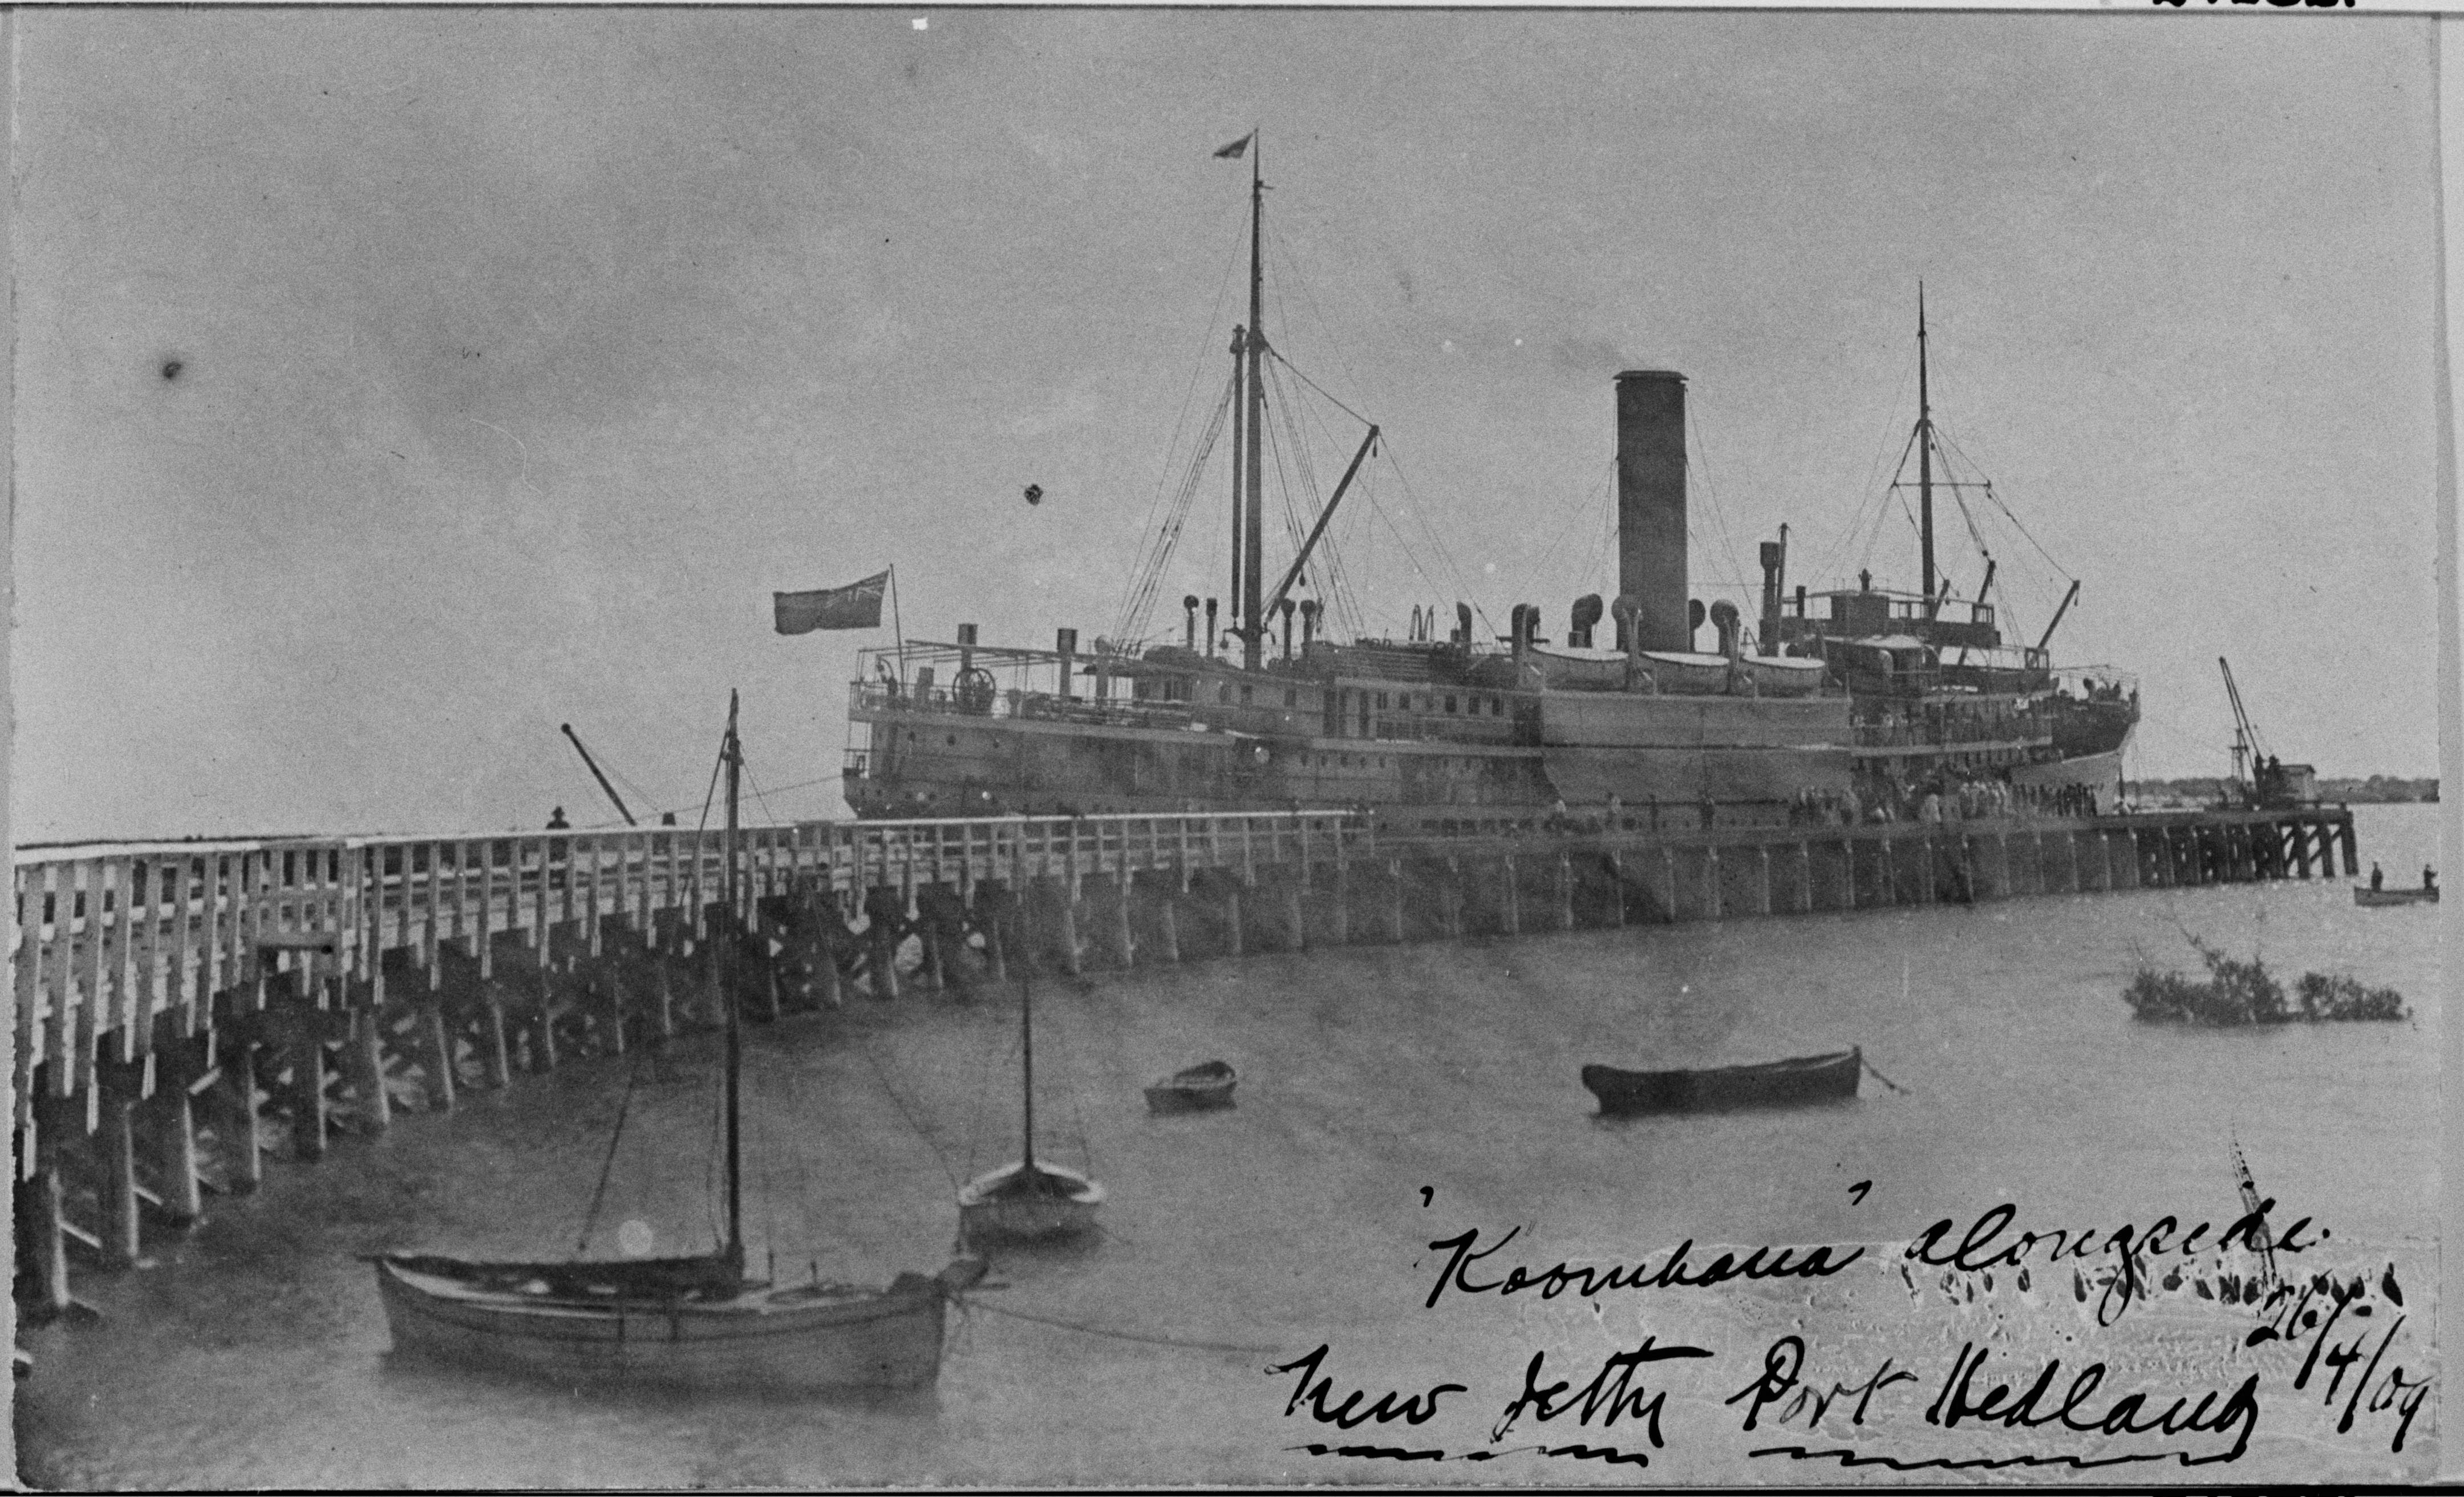 Steam ship behind a curved jetty.